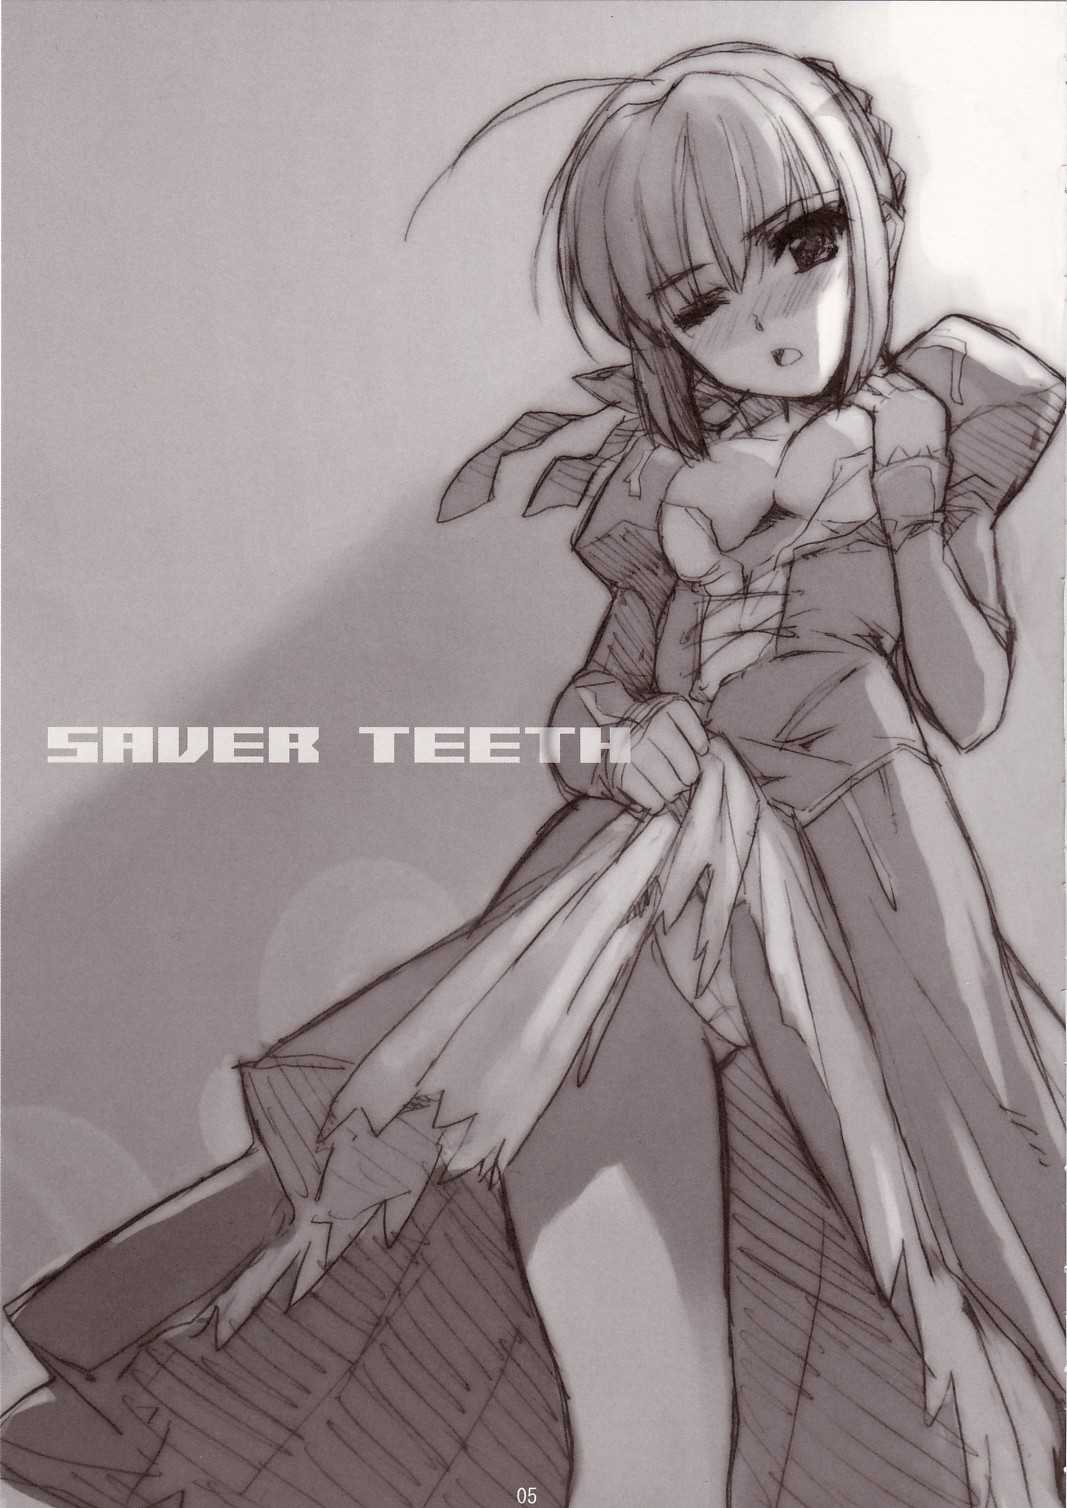 [Atomic Buster] SAVER TEETH (Fate Stay Night) 